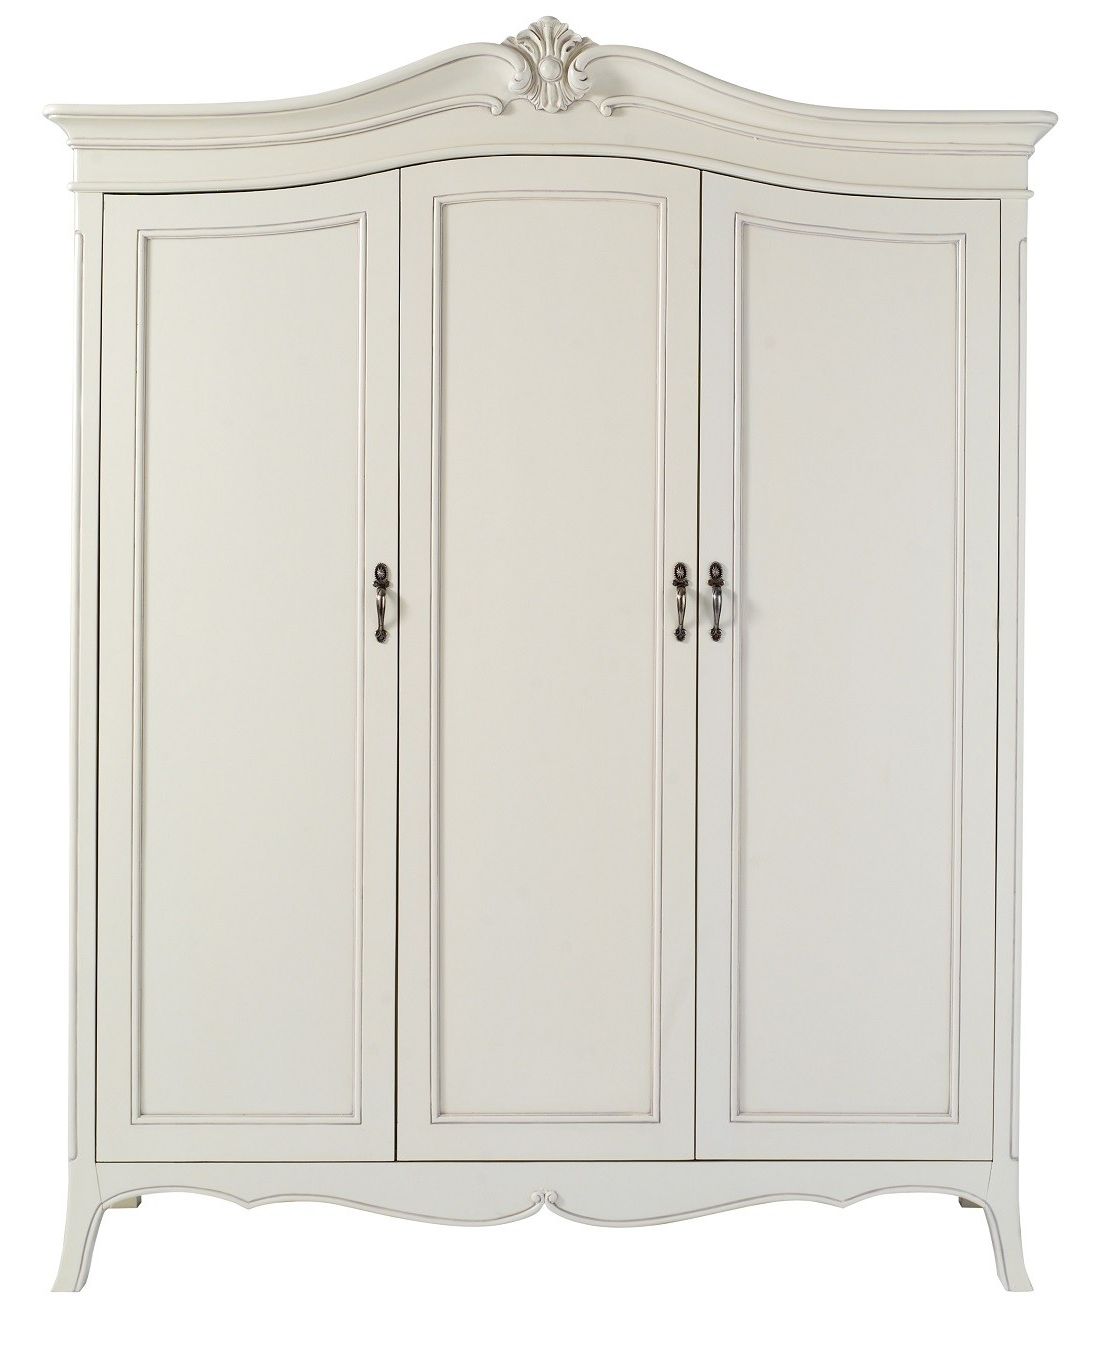 3 Door French Wardrobes Throughout 2018 Louis French Ivory Painted 3 Door Triple Wardrobe (View 1 of 15)